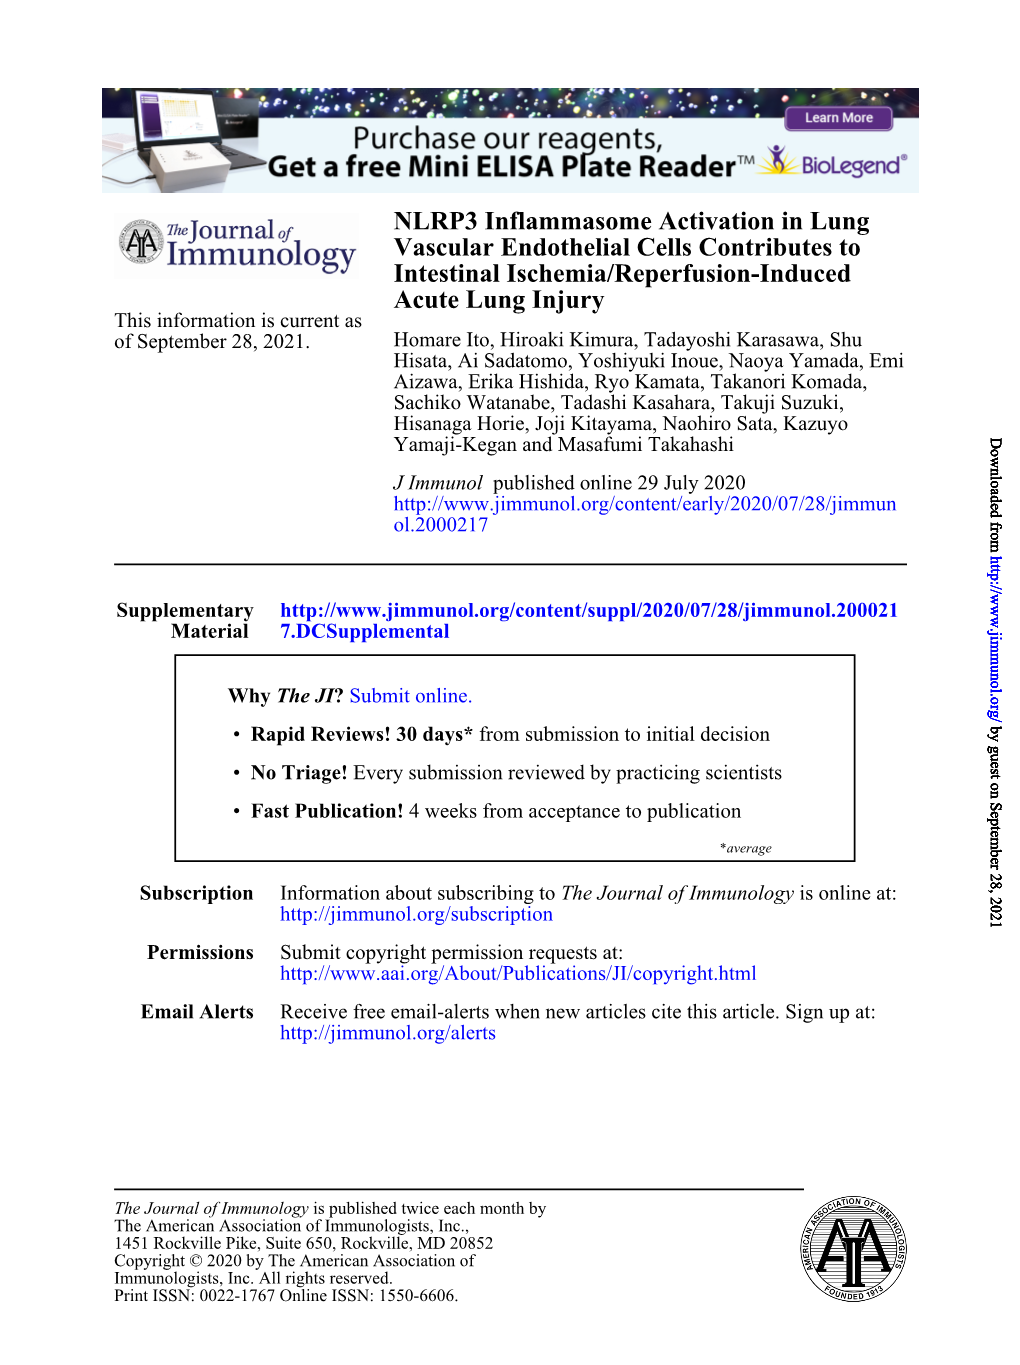 NLRP3 Inflammasome Activation in Lung Vascular Endothelial Cells